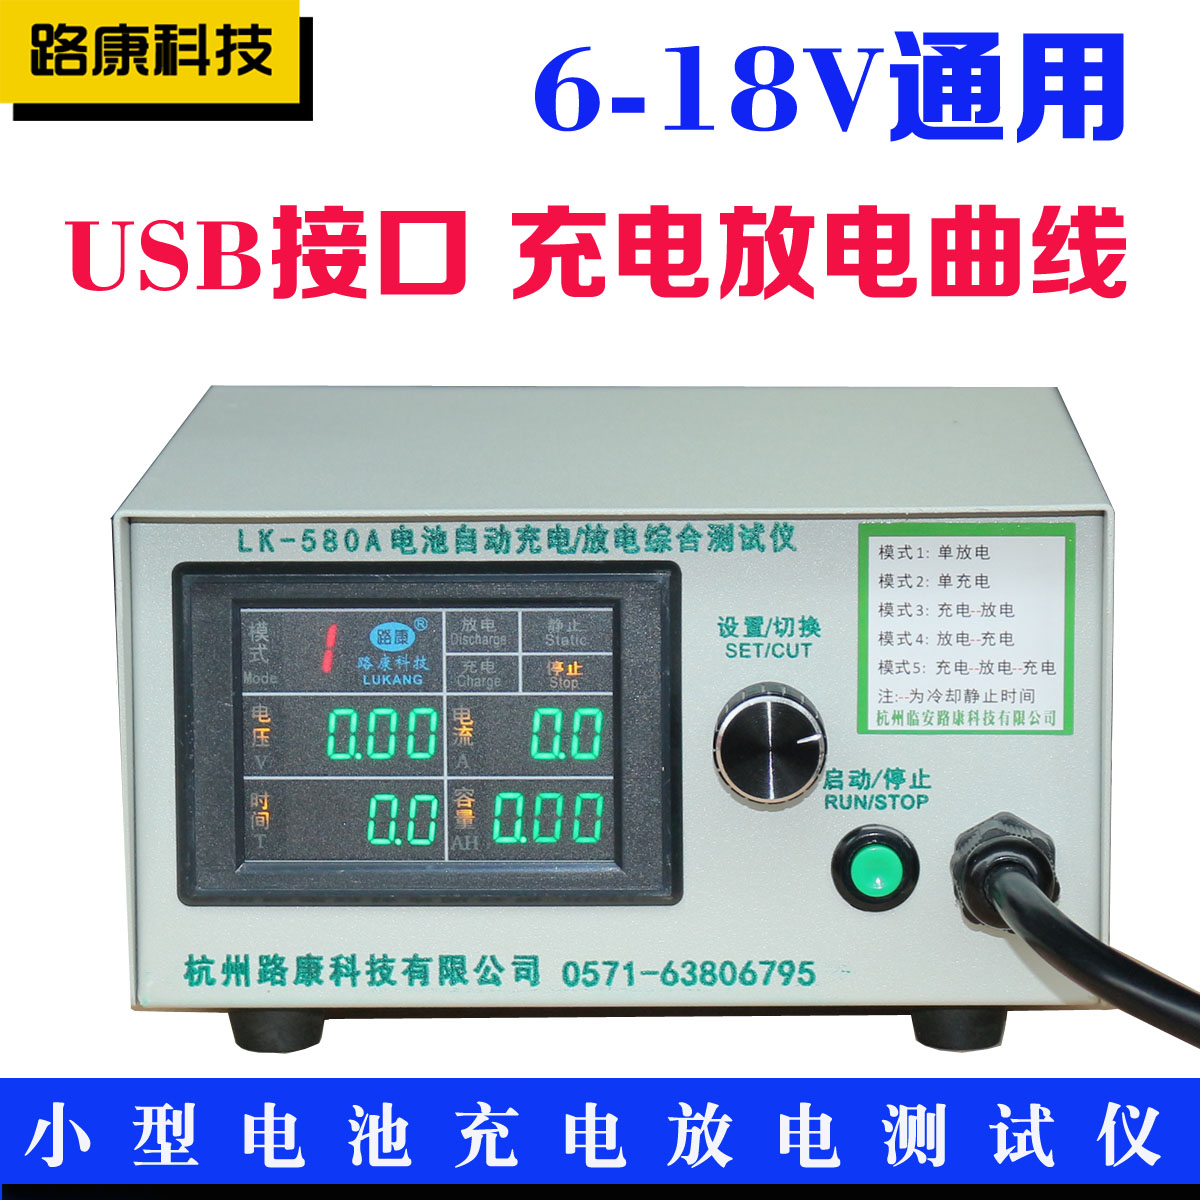 Lukang LK580A battery capacity tester 3-18V charging and discharging machine automatic cycle detector car